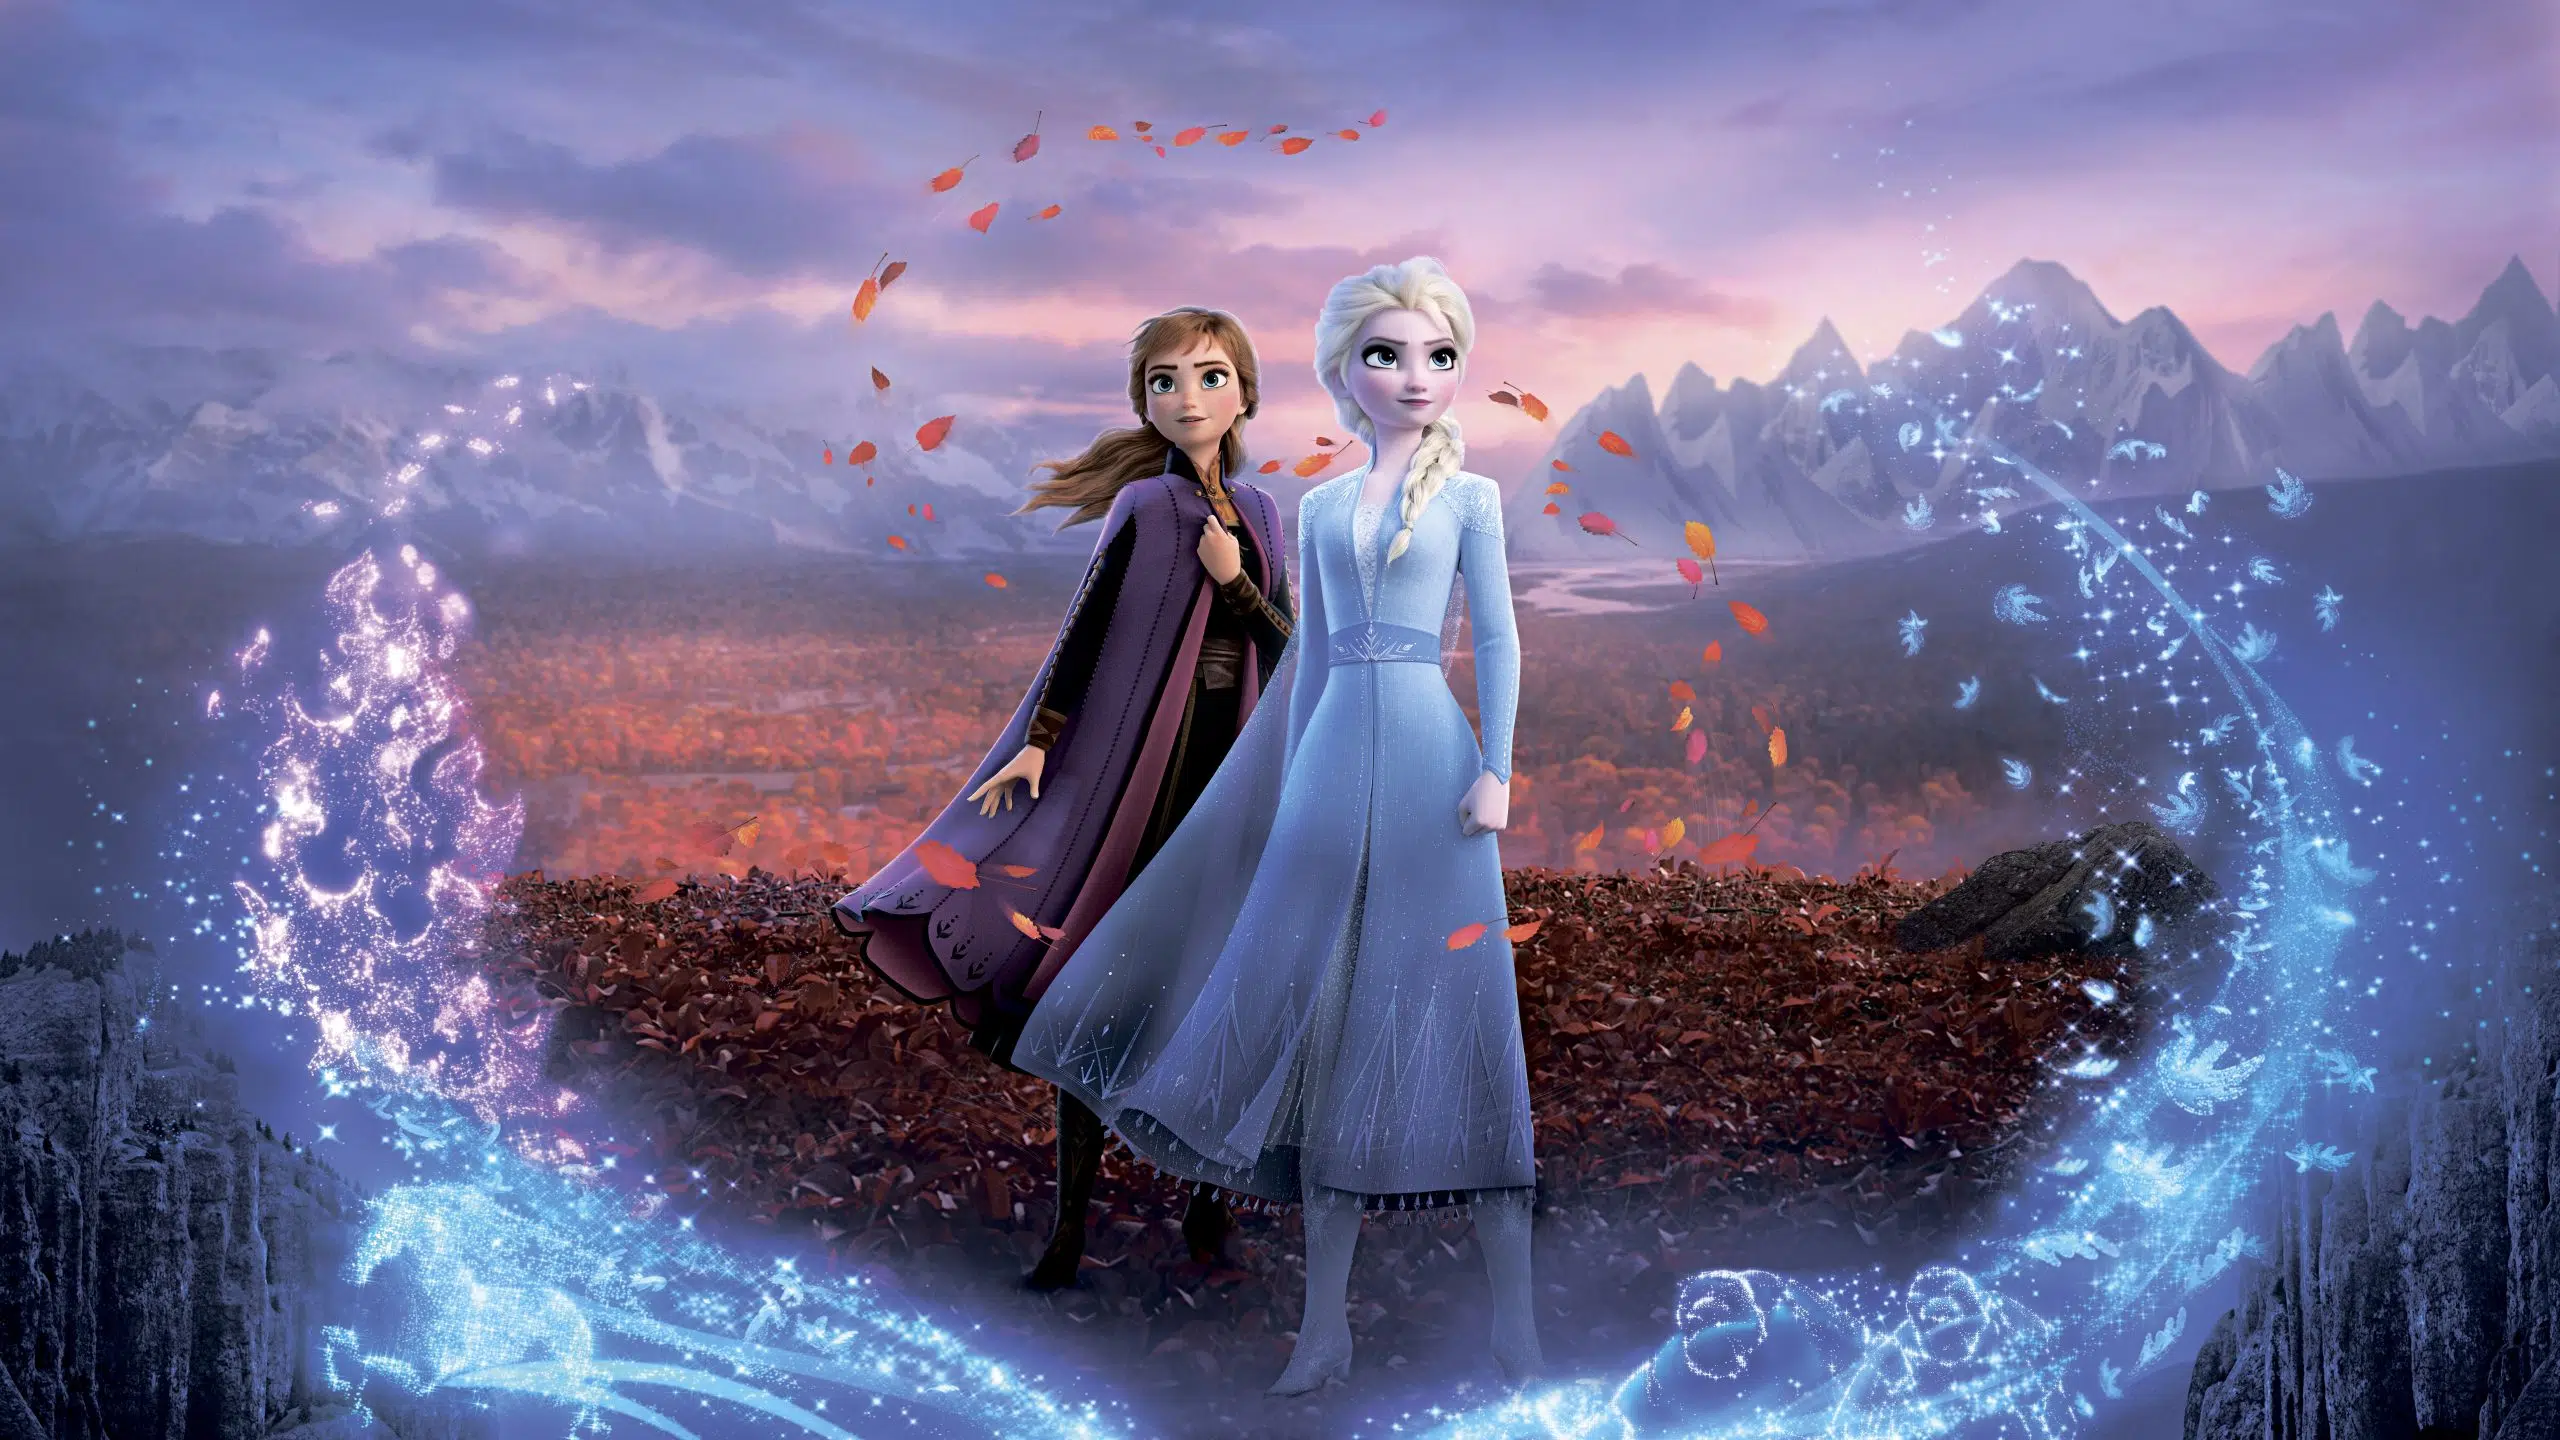 Box Office: FROZEN II Freezes out the Competition With $127M Opening